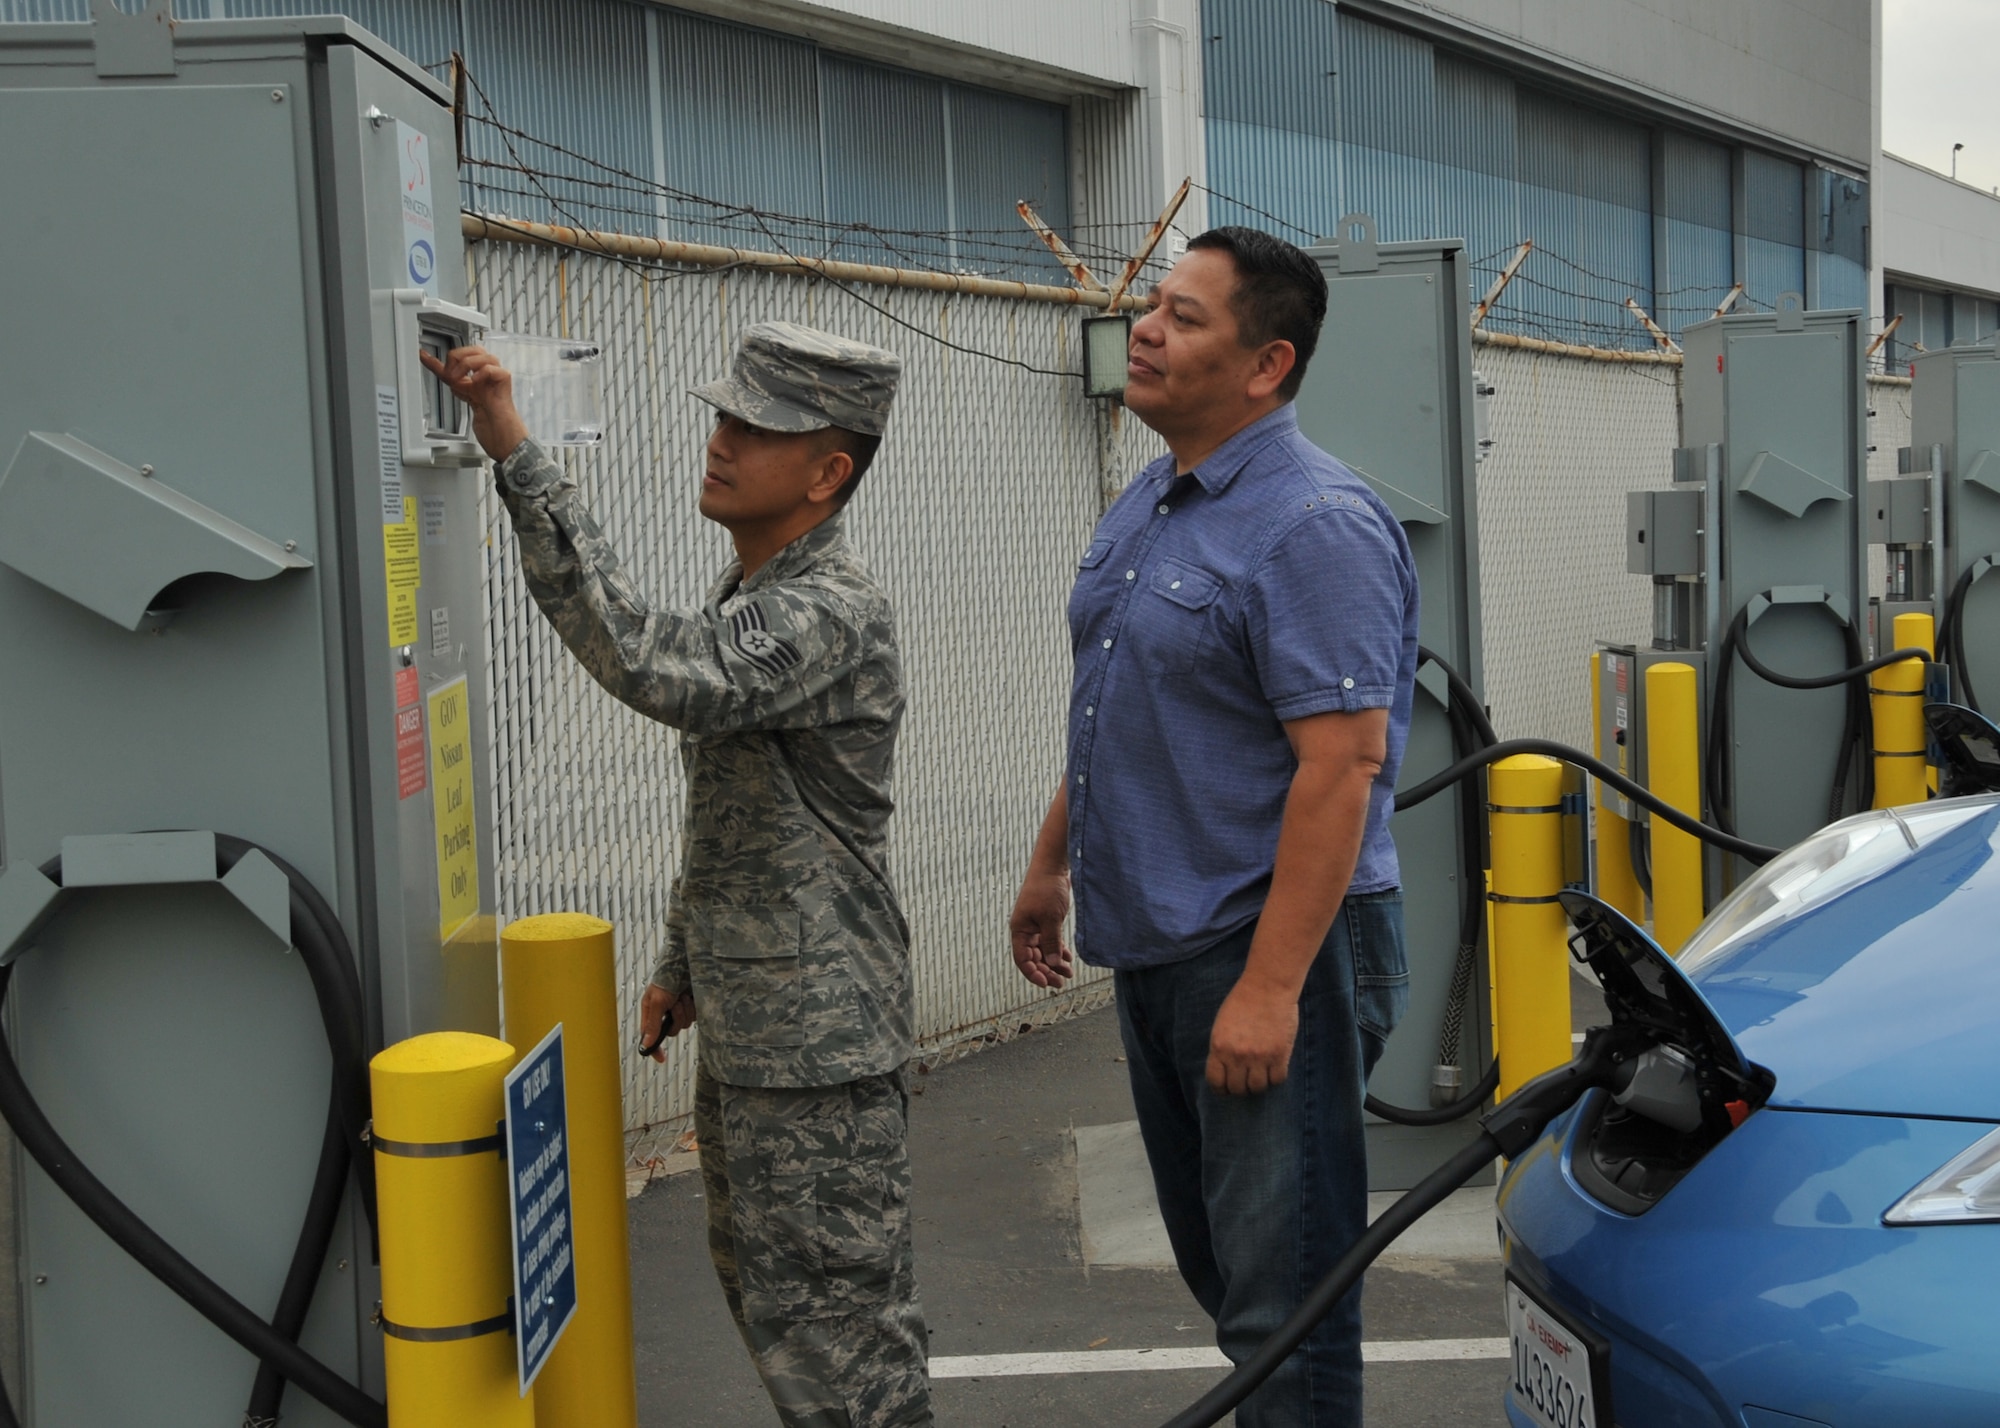 Staff Sgt Rey Sedantes (left), receives instruction on how to operate the Princeton bidirectional electric vehicle charging stations from vehicle operations contractor, Oscar Machado, right, during a training demo Oct. 31, 2014, in El Segundo, Calif. The charging stations will charge the electric vehicles directly from the local utility grid enabling Los Angeles Air Force Base personnel to utilize the electric vehicles as transportation within the base. When called-upon, and when connected to the electric vehicle, the bidirectional charging station will switch power flow directions in order to support vehicle-to-grid energy request by discharging the electric vehicle’s onboard battery. Sedantes is with the 61st Civil Engineering and Logistics Squadron. (U.S. Air Force photo/Sarah Corrice)